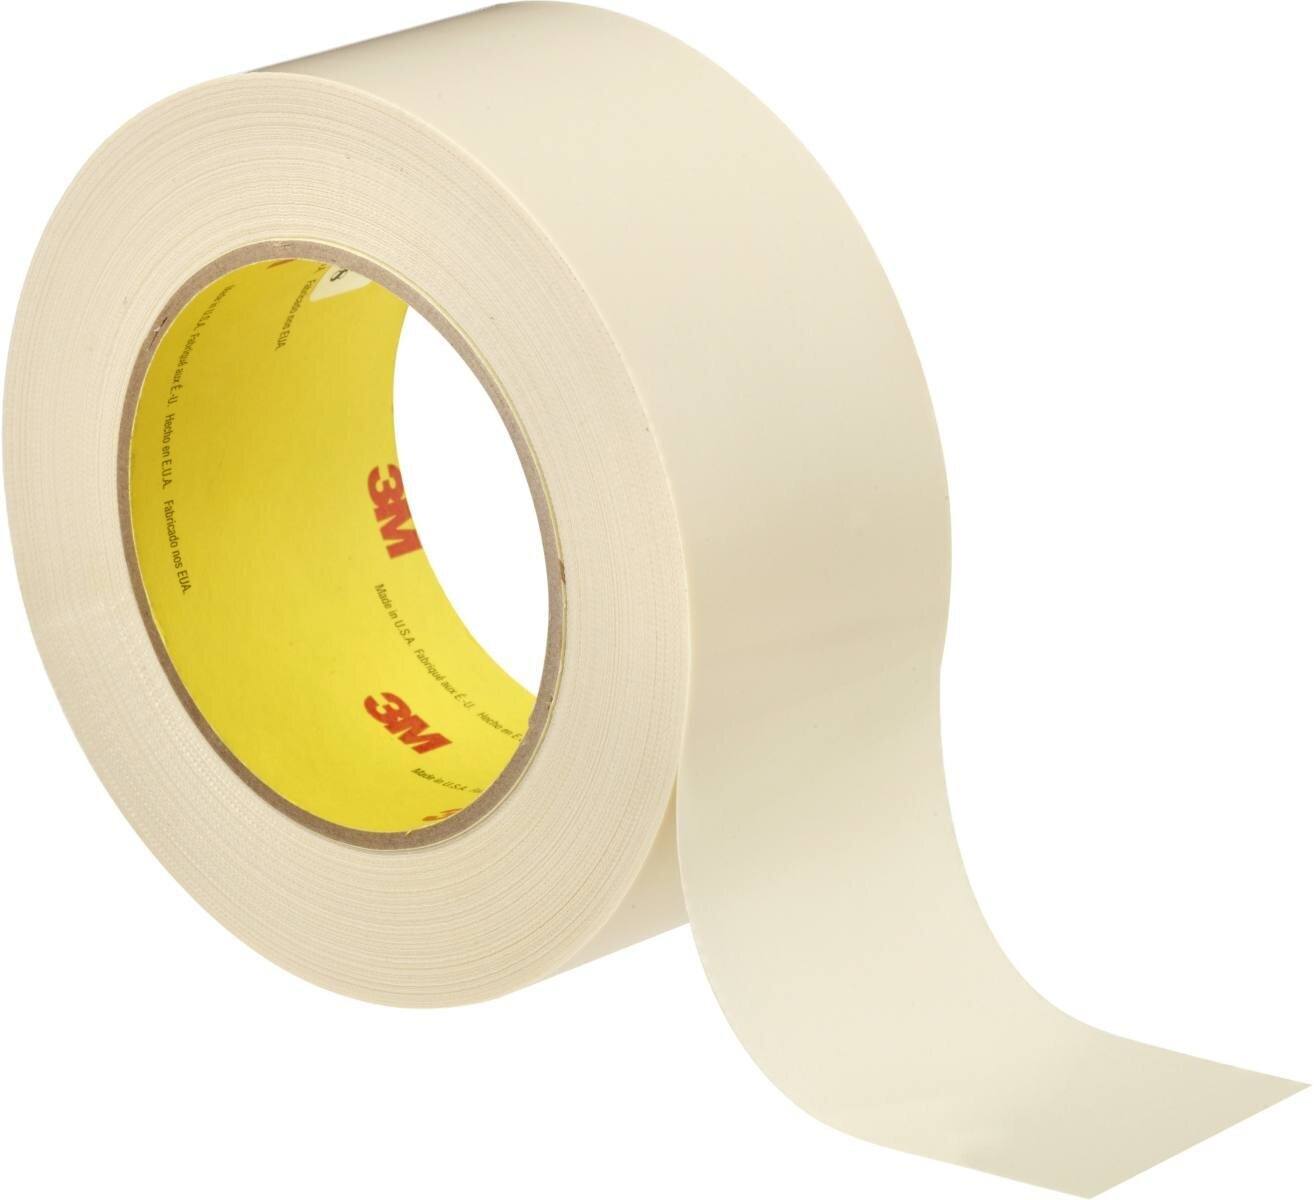 3M 5401 Traction Tape 50mmx33m